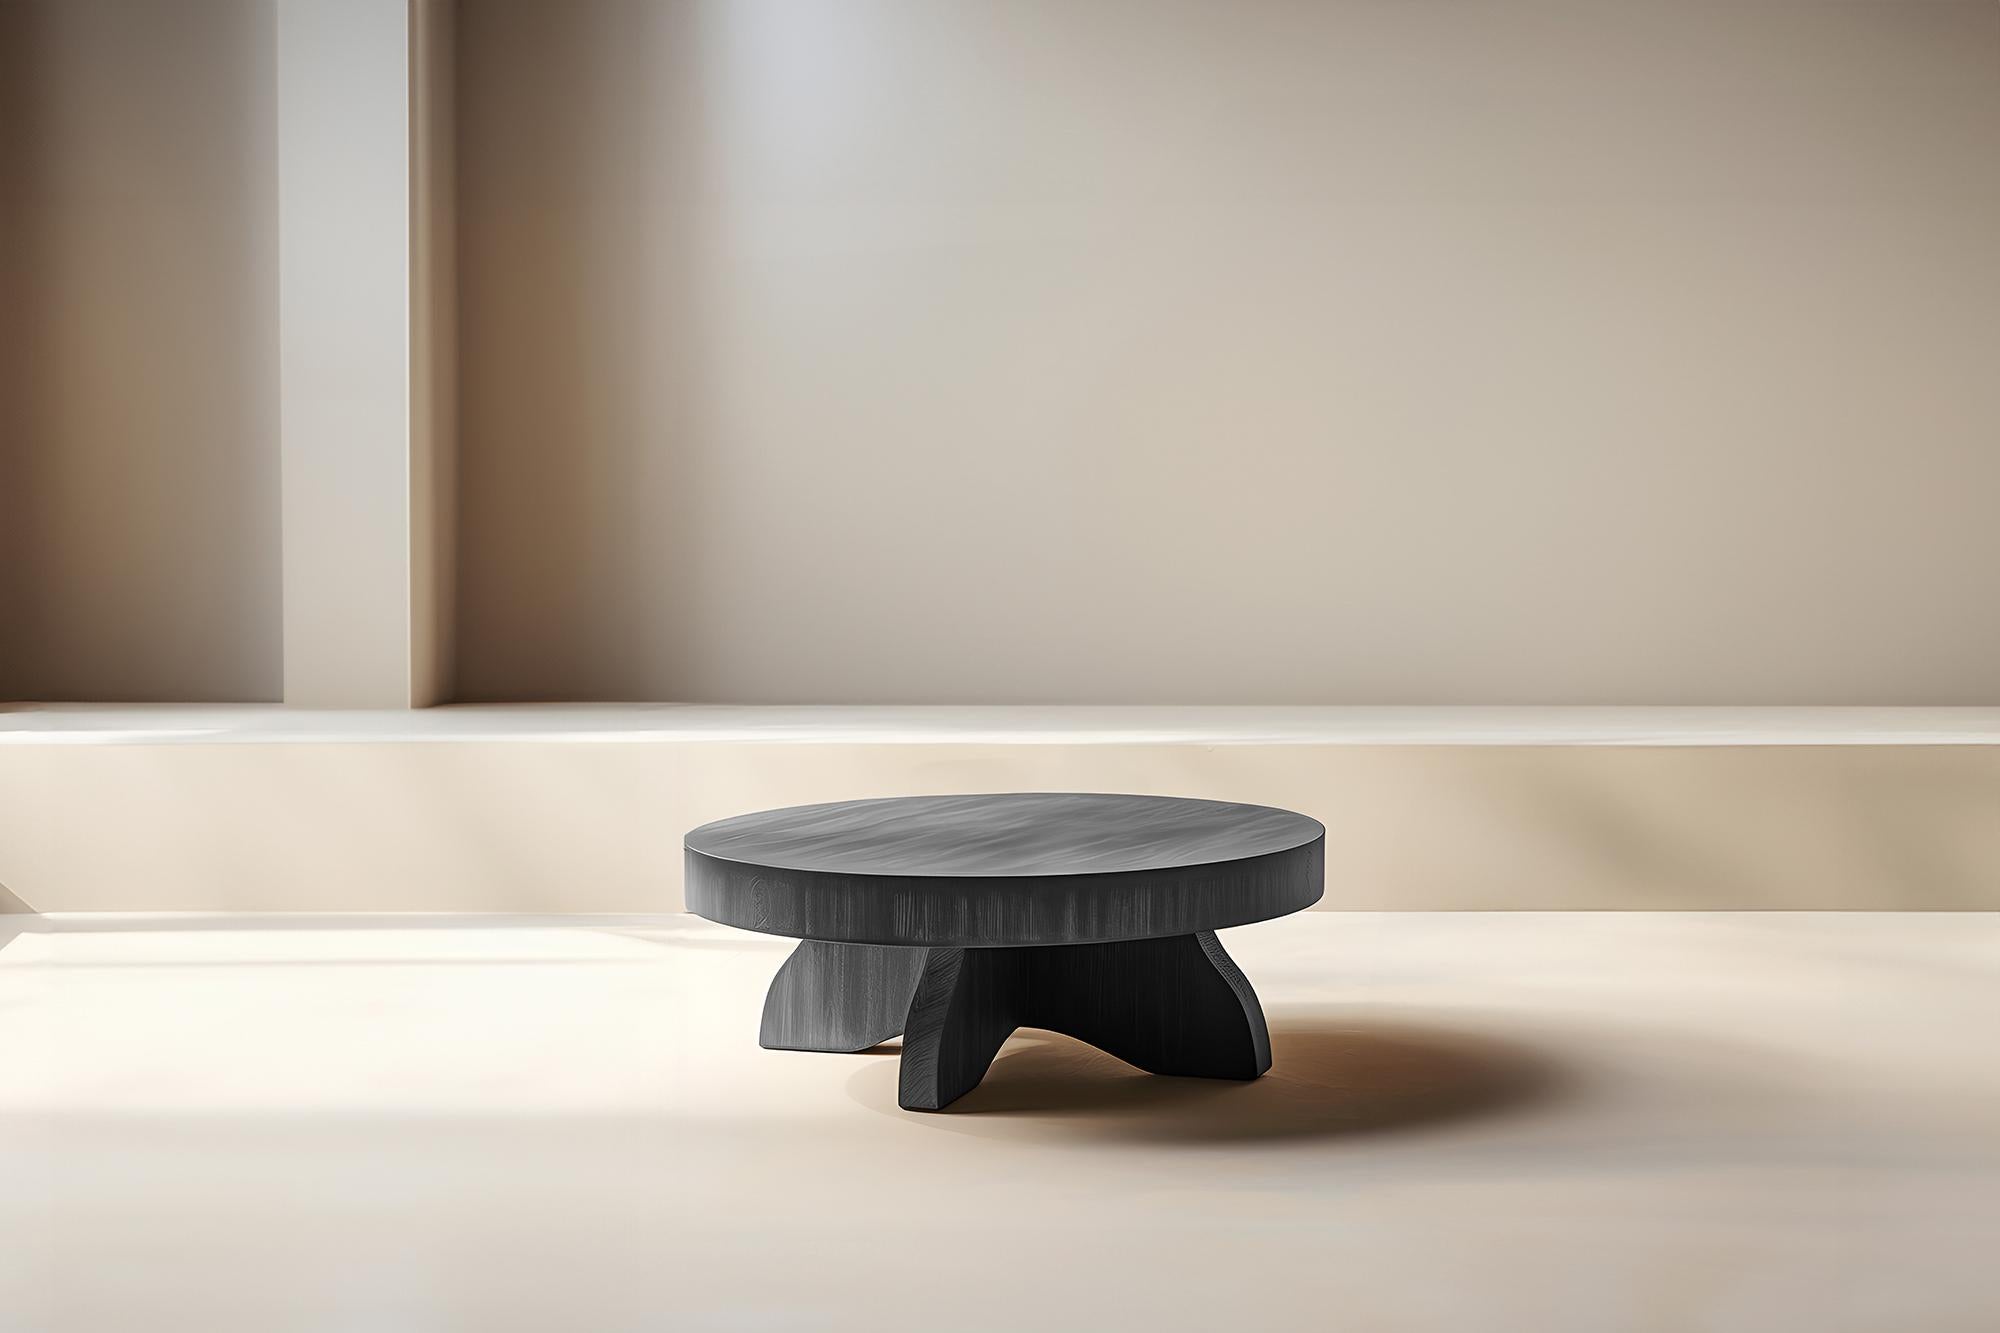 Round Top Fundamenta Coffee 52 Abstract Oak, Stylish Design by NONO


Sculptural coffee table made of solid wood with a natural water-based or black tinted finish. Due to the nature of the production process, each piece may vary in grain, texture,